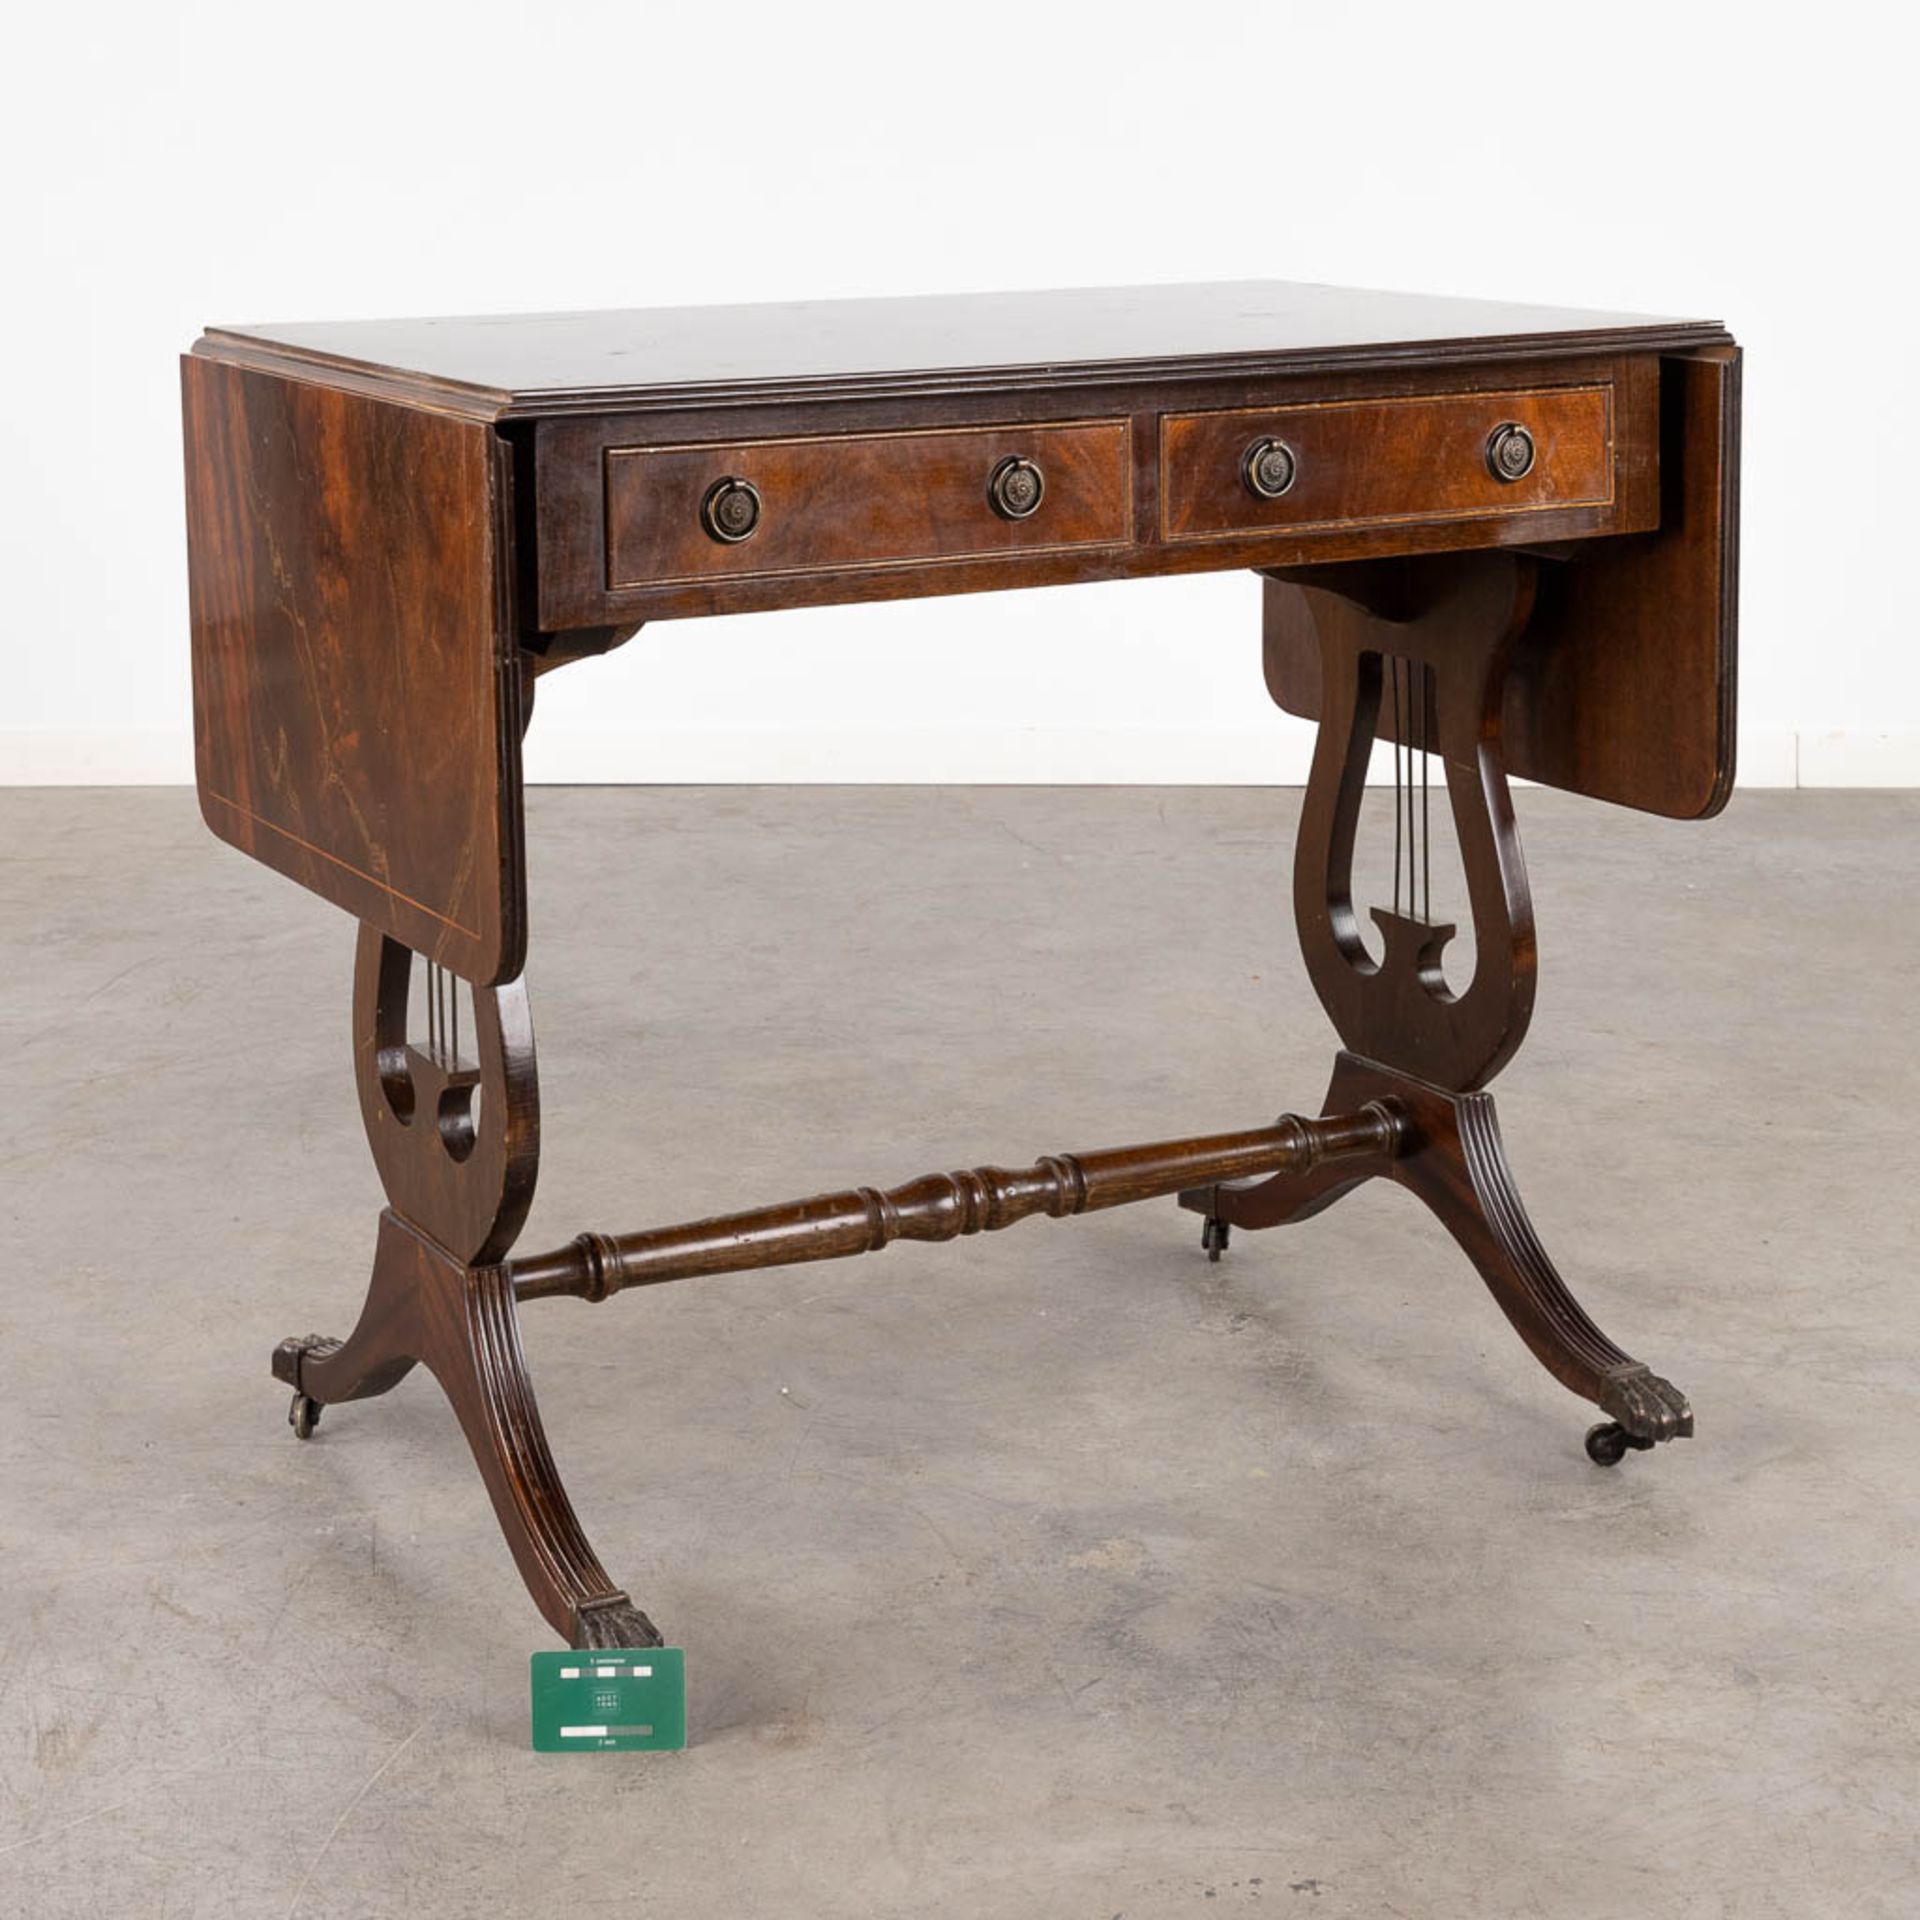 An English drop-leaf desk, decorated with a lire. 20th C. (D:51 x W:150 x H:75 cm) - Image 2 of 15